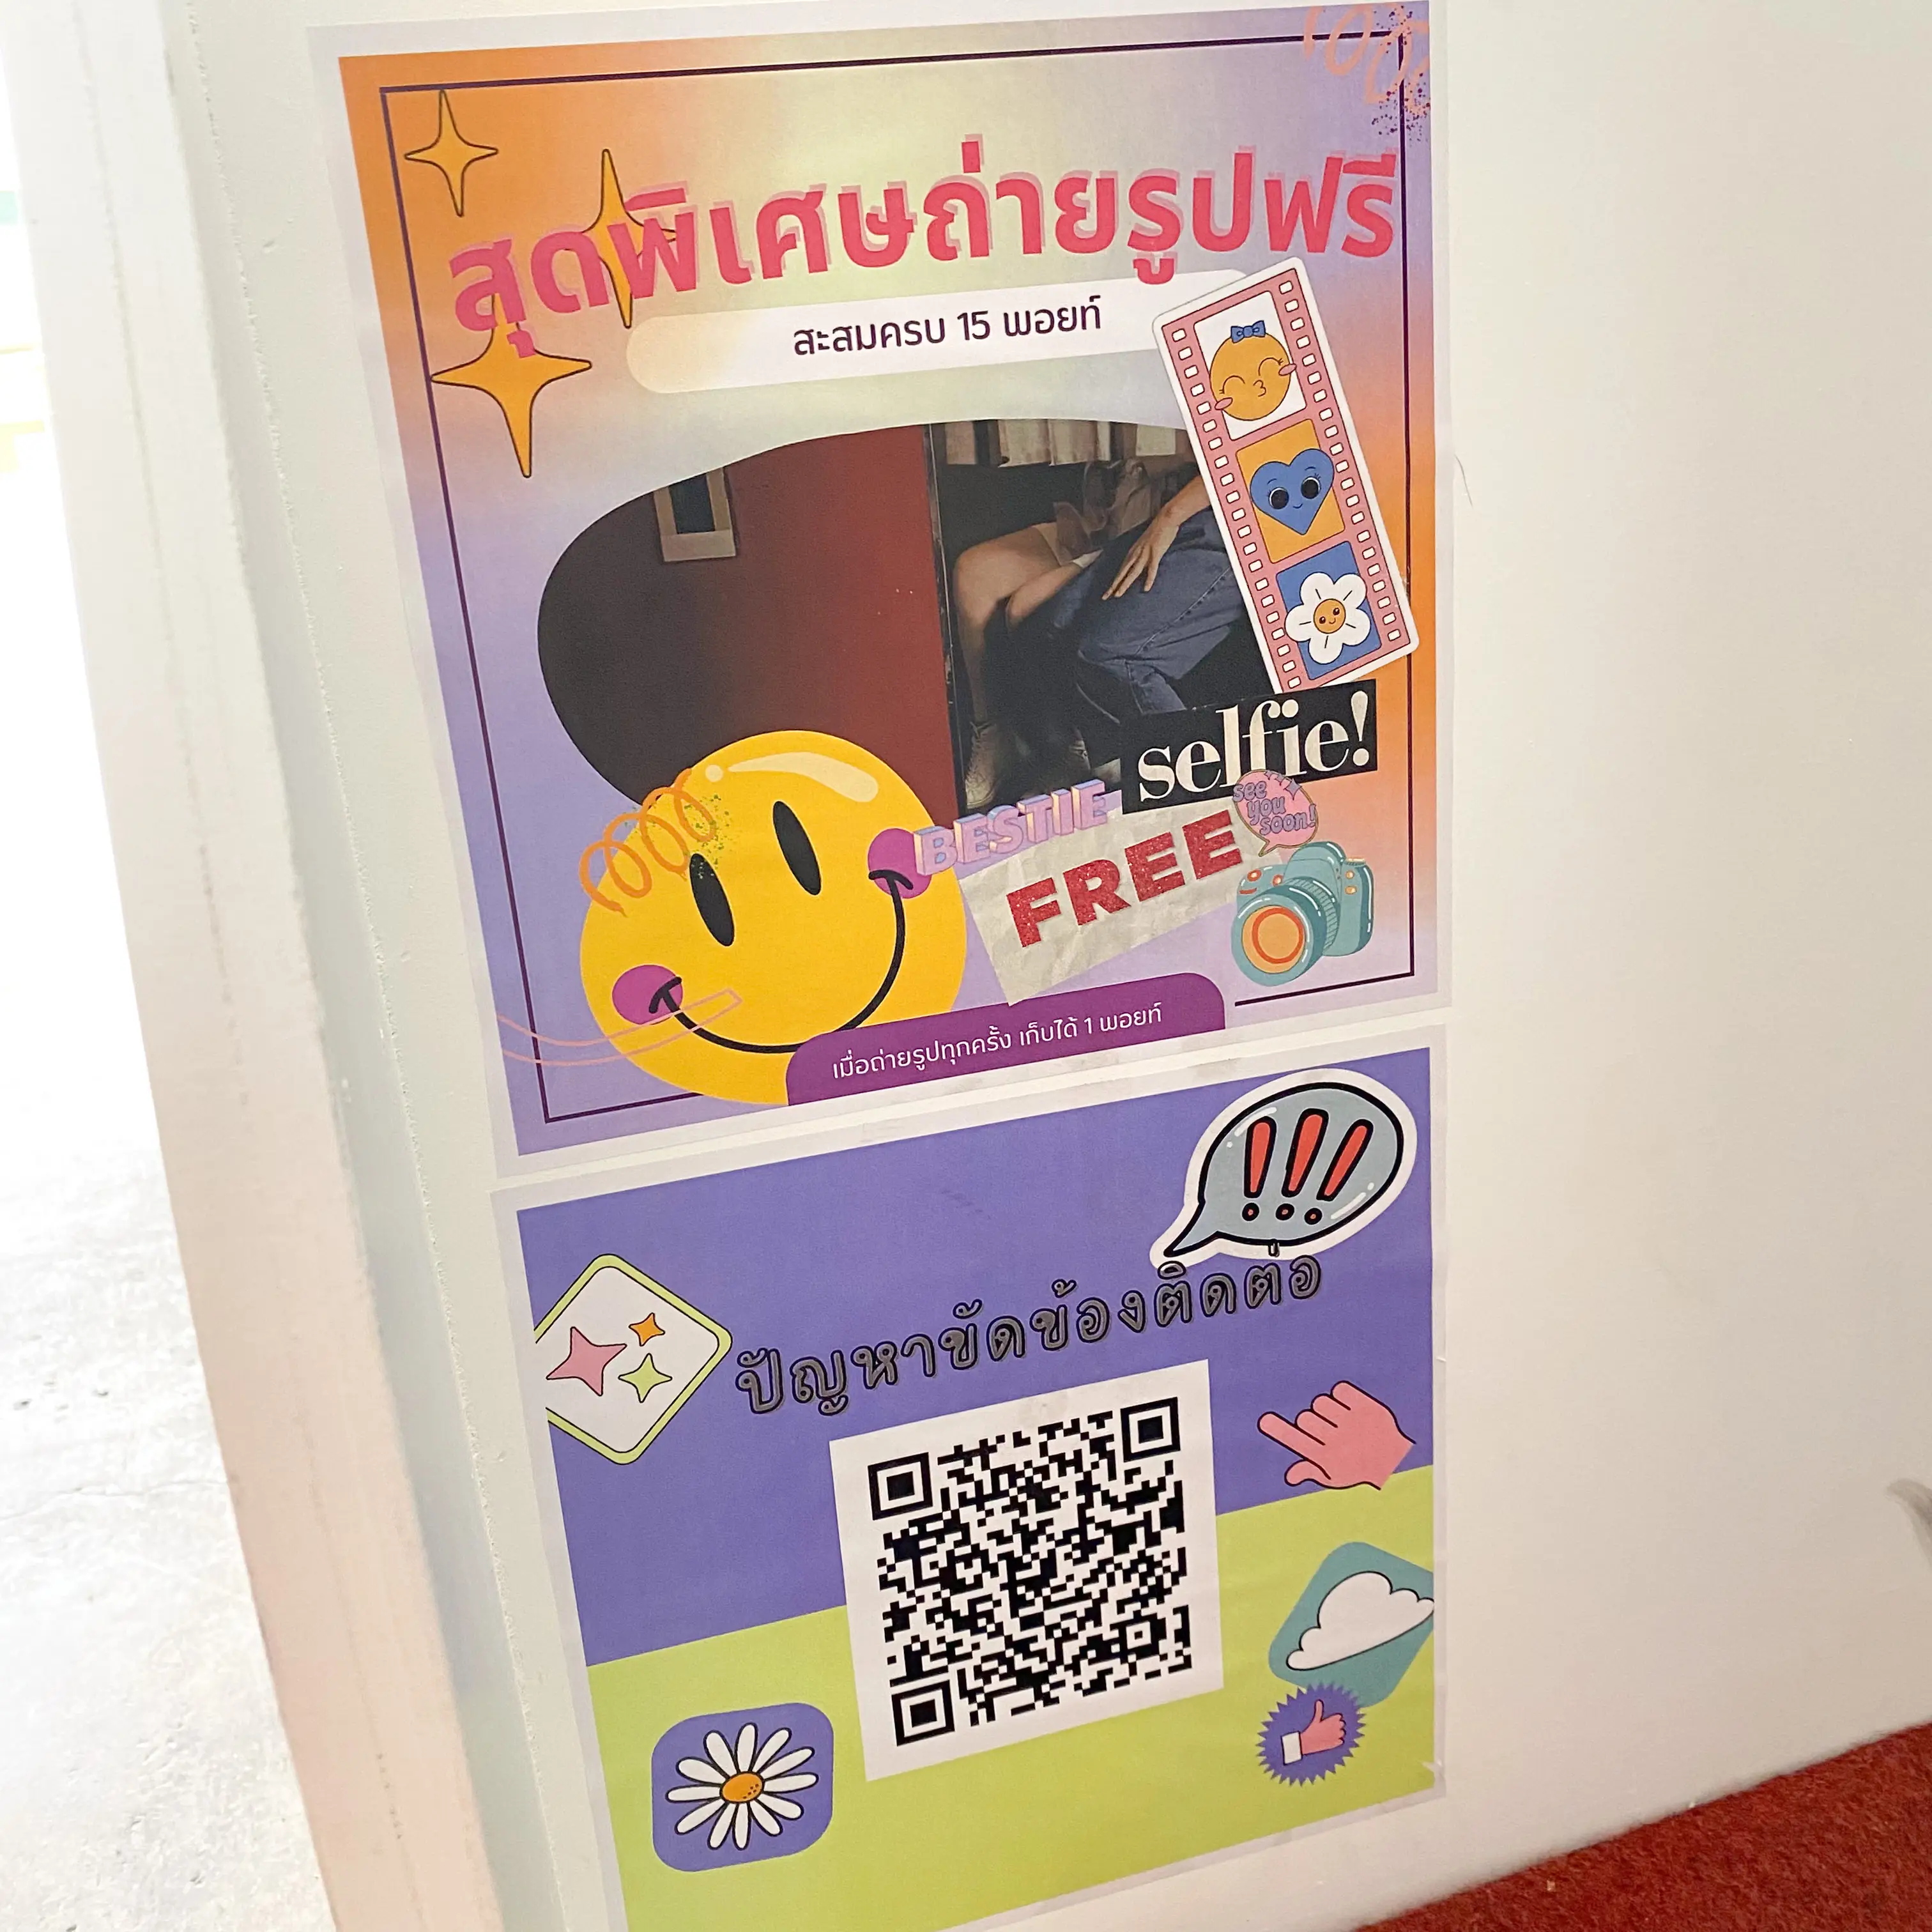 Photo booth in Bangkok! 📸🎞, Gallery posted by Aonntps